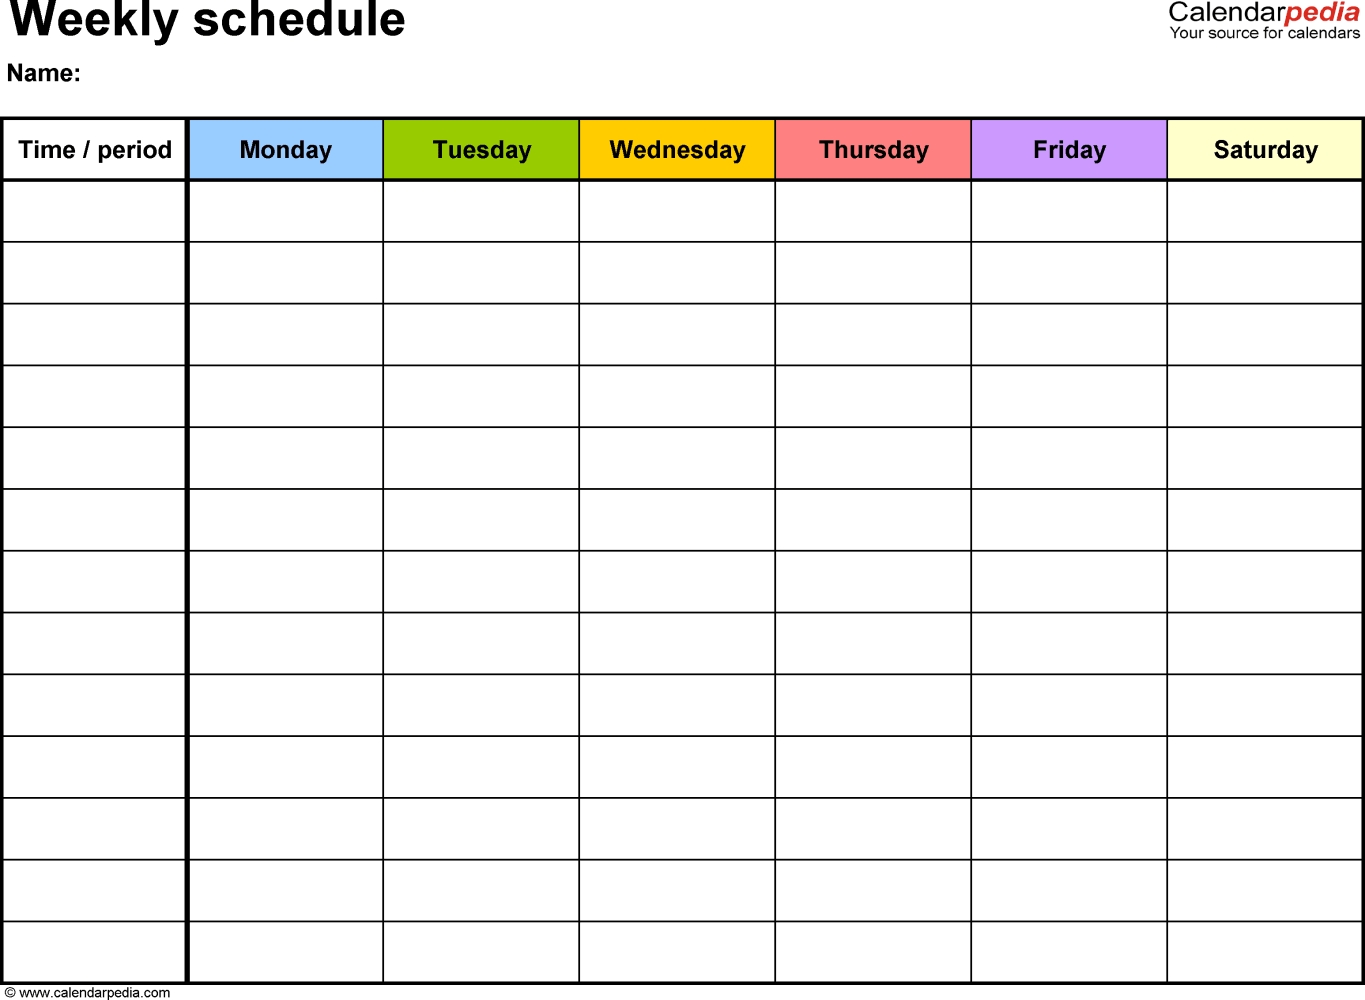 Daily Calendar Le Free Weekly Schedule Templates For Excel Template  One Week Daily Calendar Printable